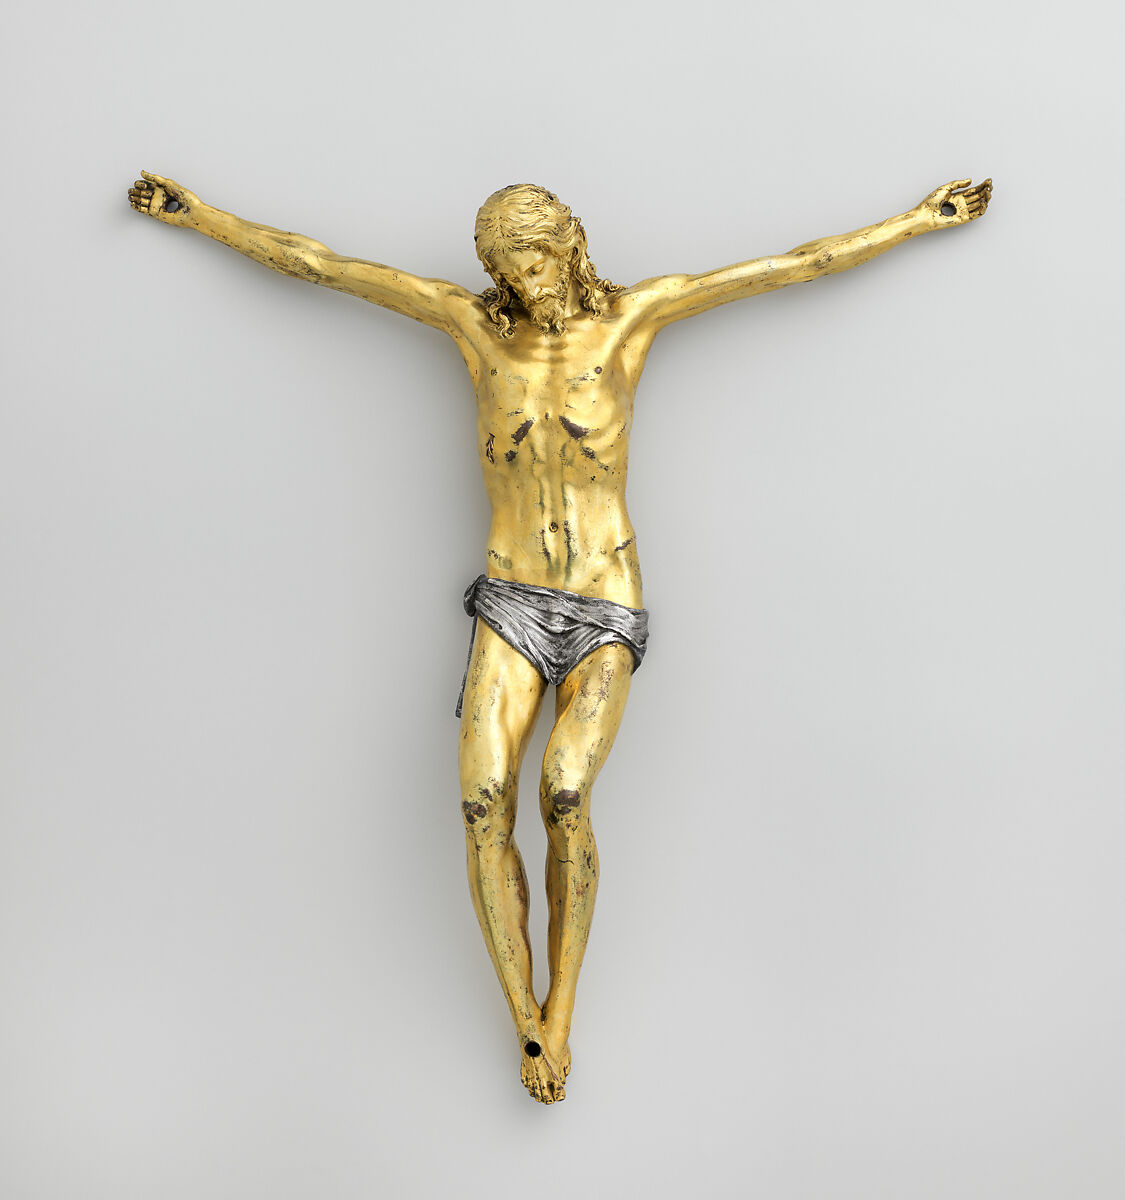 Corpus from a crucifix, Bronze, fire-gilt; silver, Possibly Italian or French 